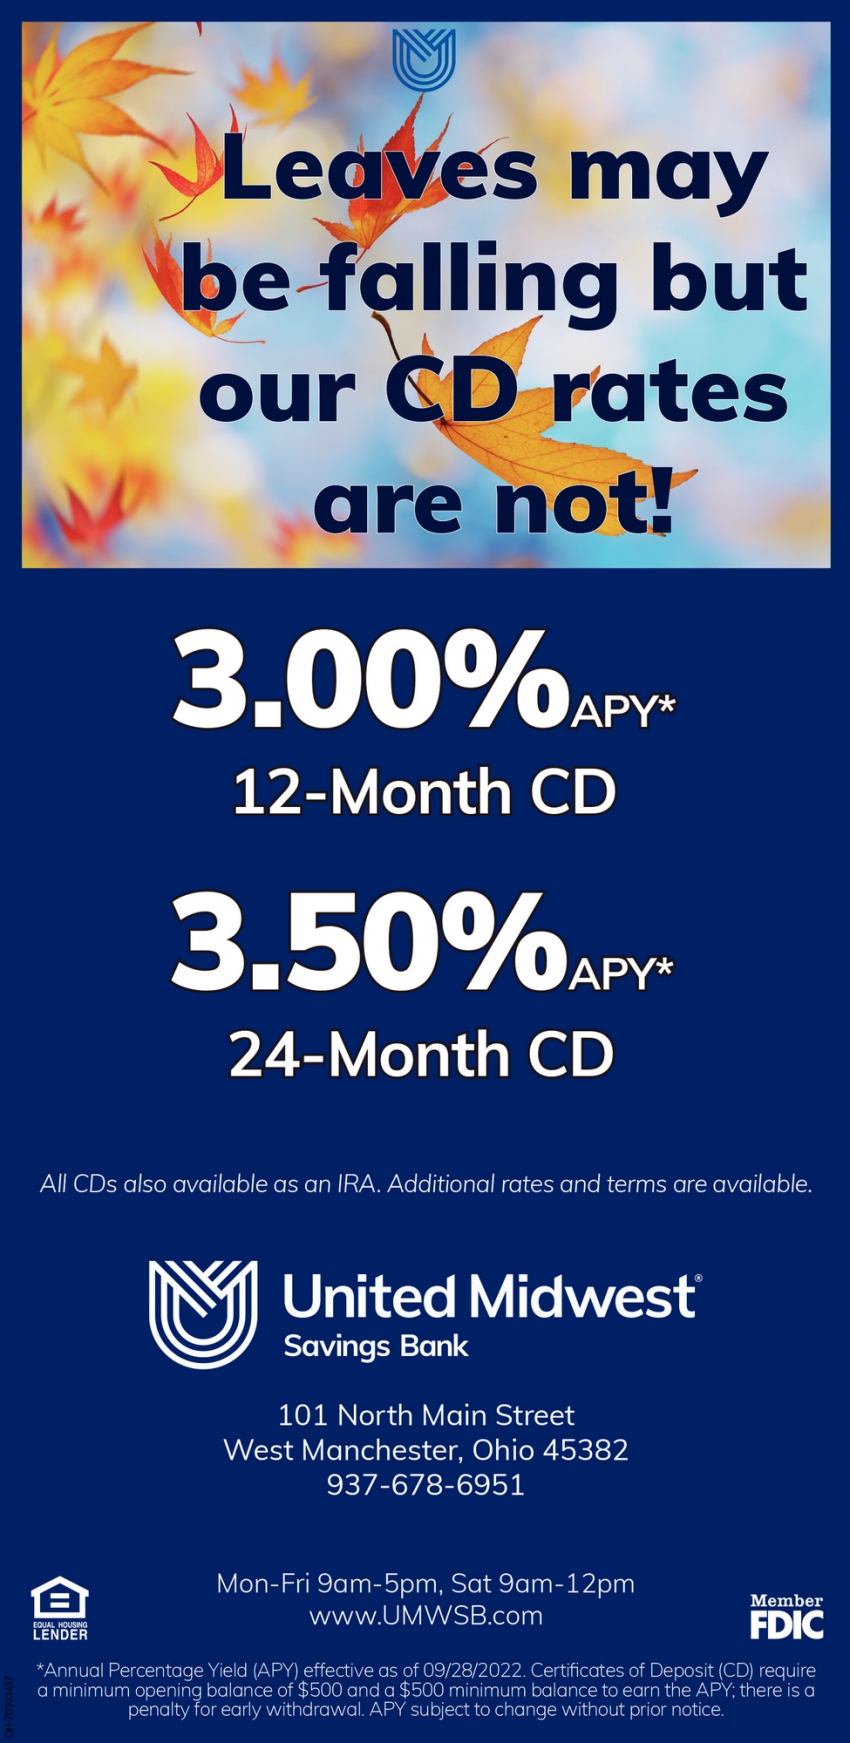 Leaves May Be Falling But Our CD Rates Are Not!